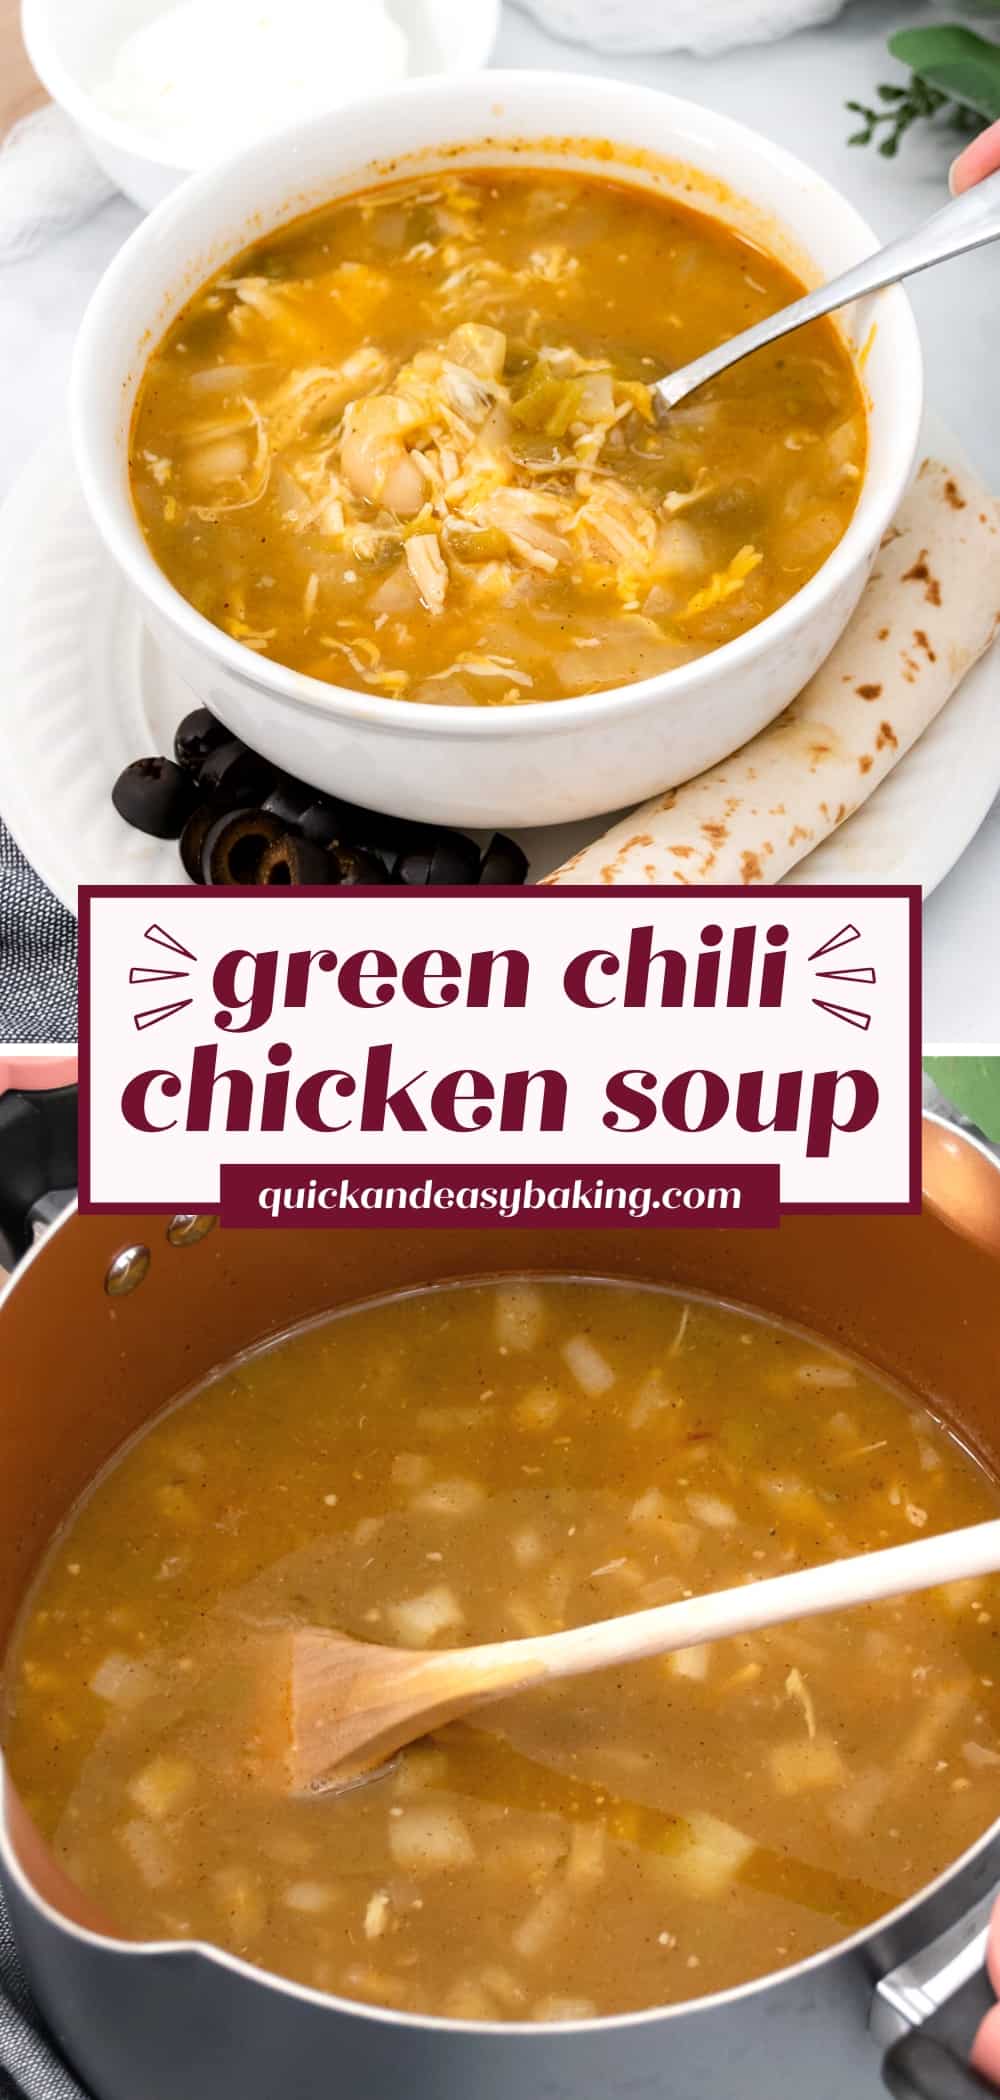 Collage chili verde soup in a bowl and soup in a large pot with spoons and text overlay.